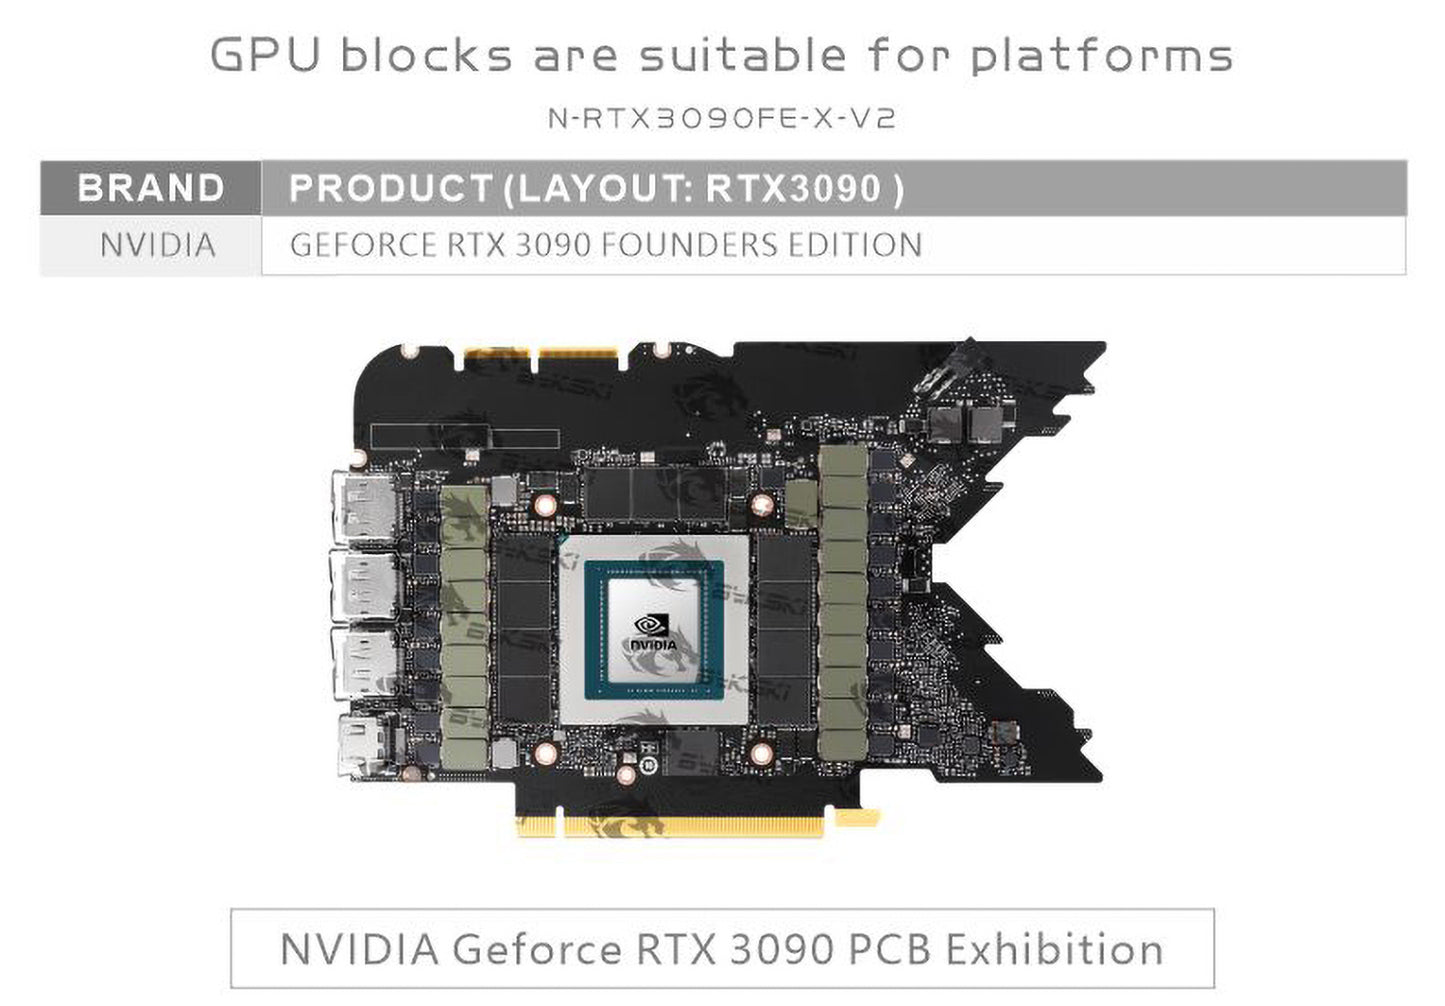 Bykski GPU Block With Active Waterway Backplane Cooler For Nvidia RTX 3090 Founder Edition N-RTX3090FE-TC